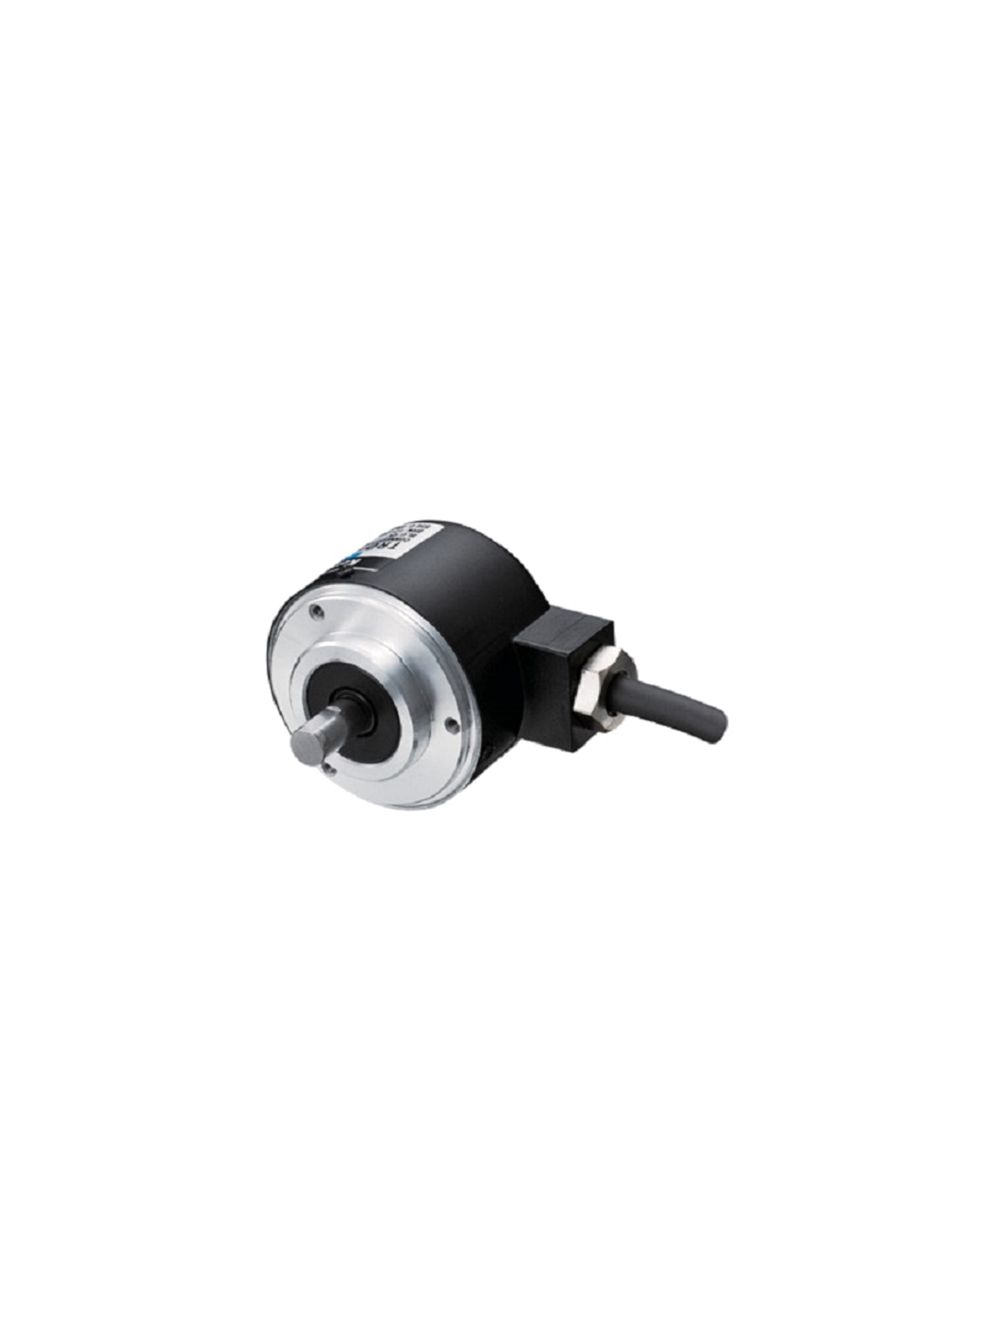 New In stock for sale, KOYO Solid-shaft Absolute Rotary Encoder TRD-NA512-RNW